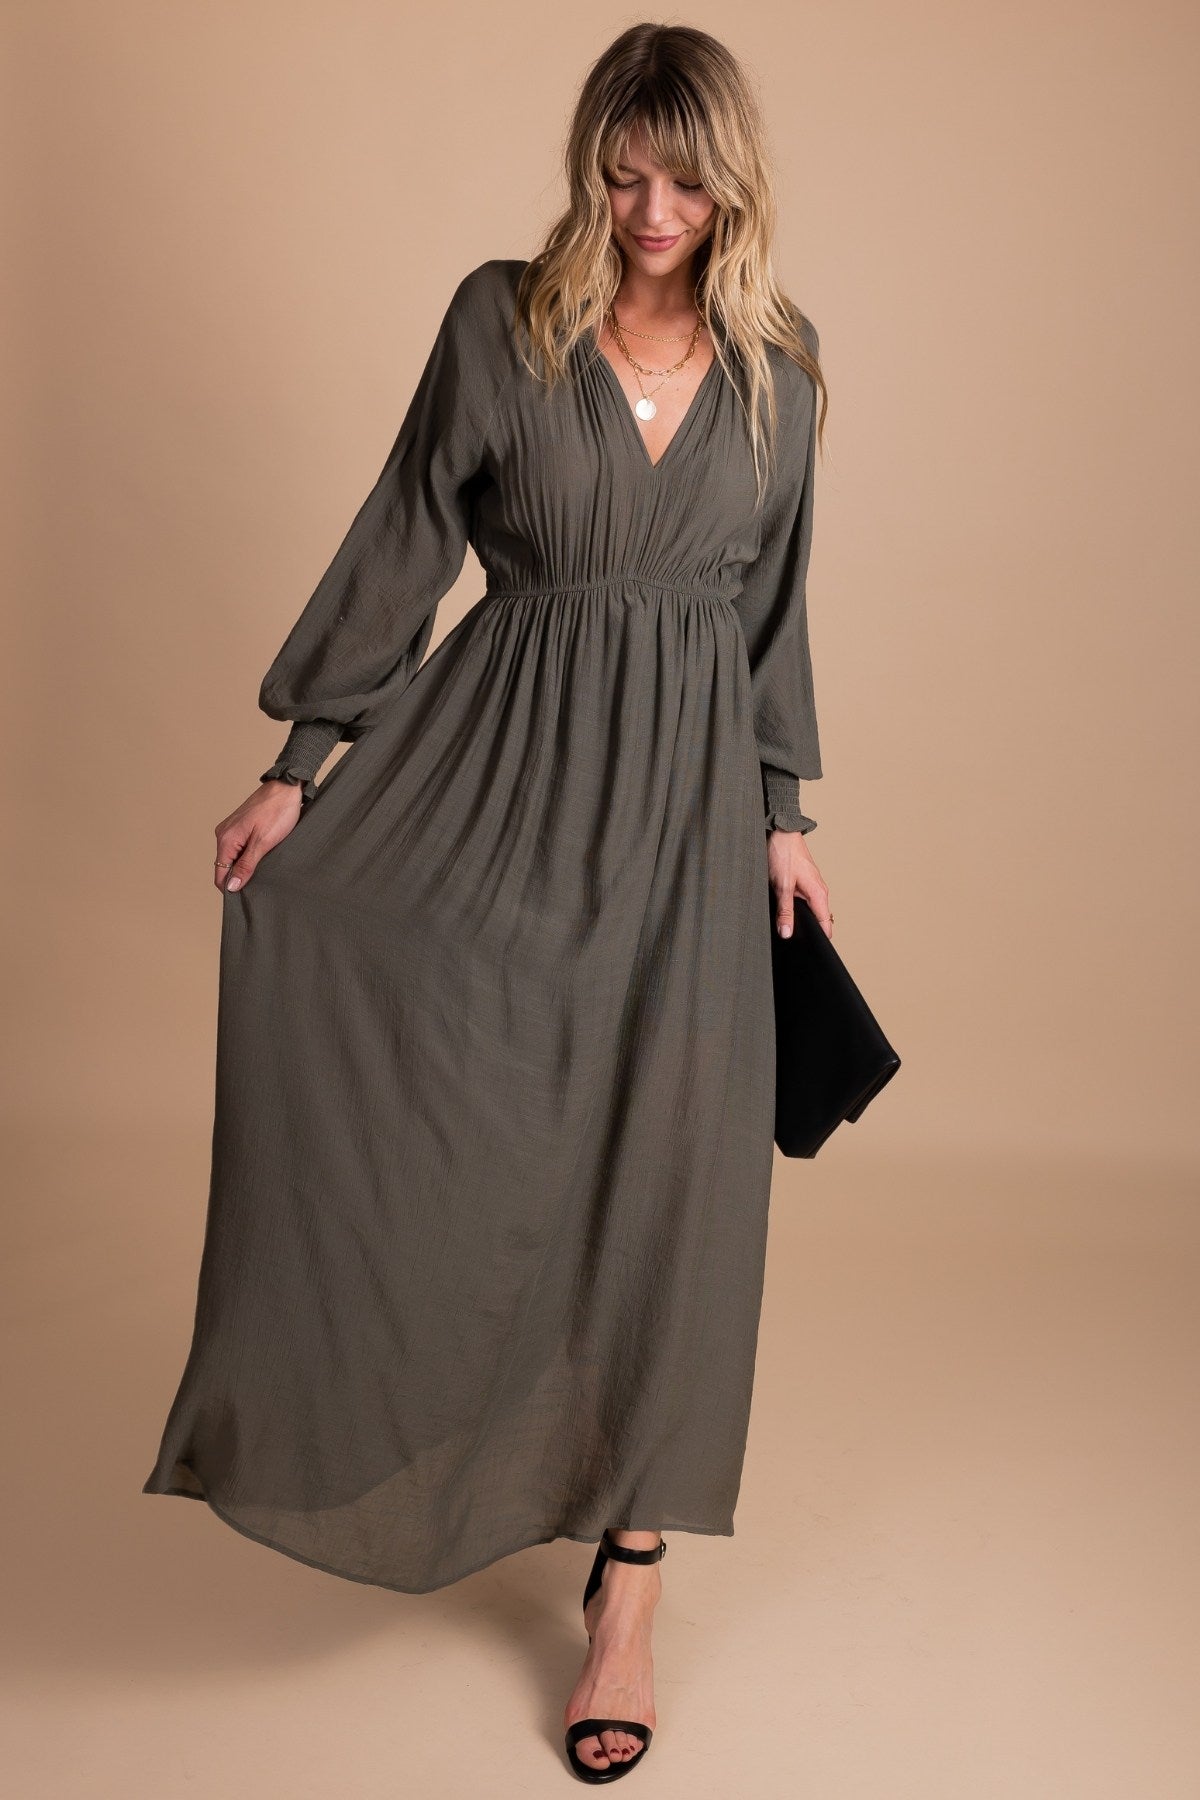 Women's Dark Olive Green Maxi Dress with Long Sleeves